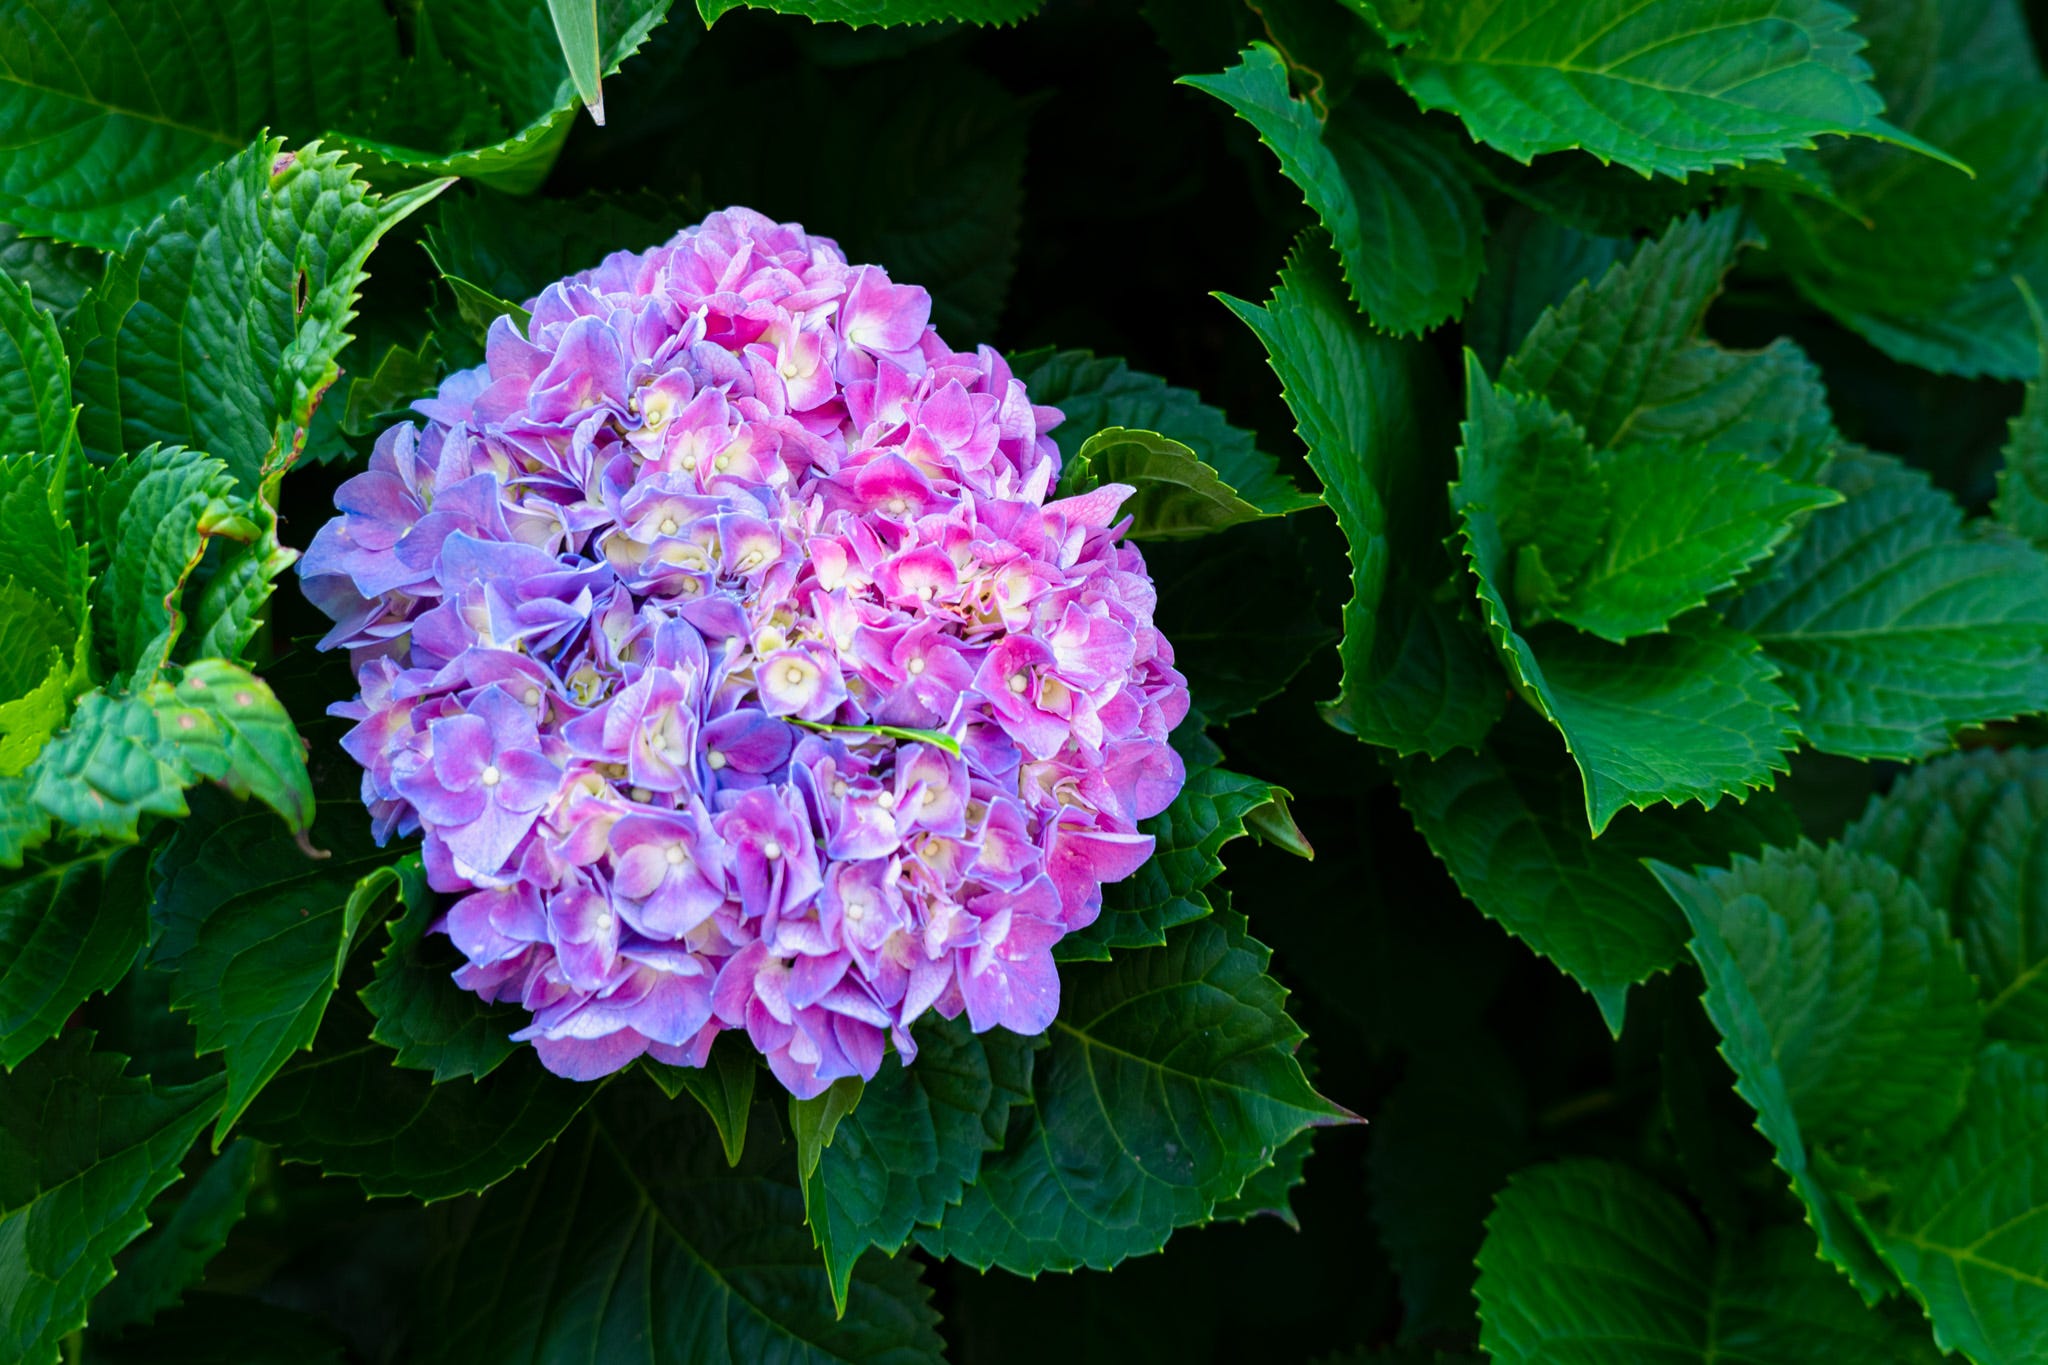 A large pink and blue-tinged hydrangea blossom against the dark green leaves of the plant.